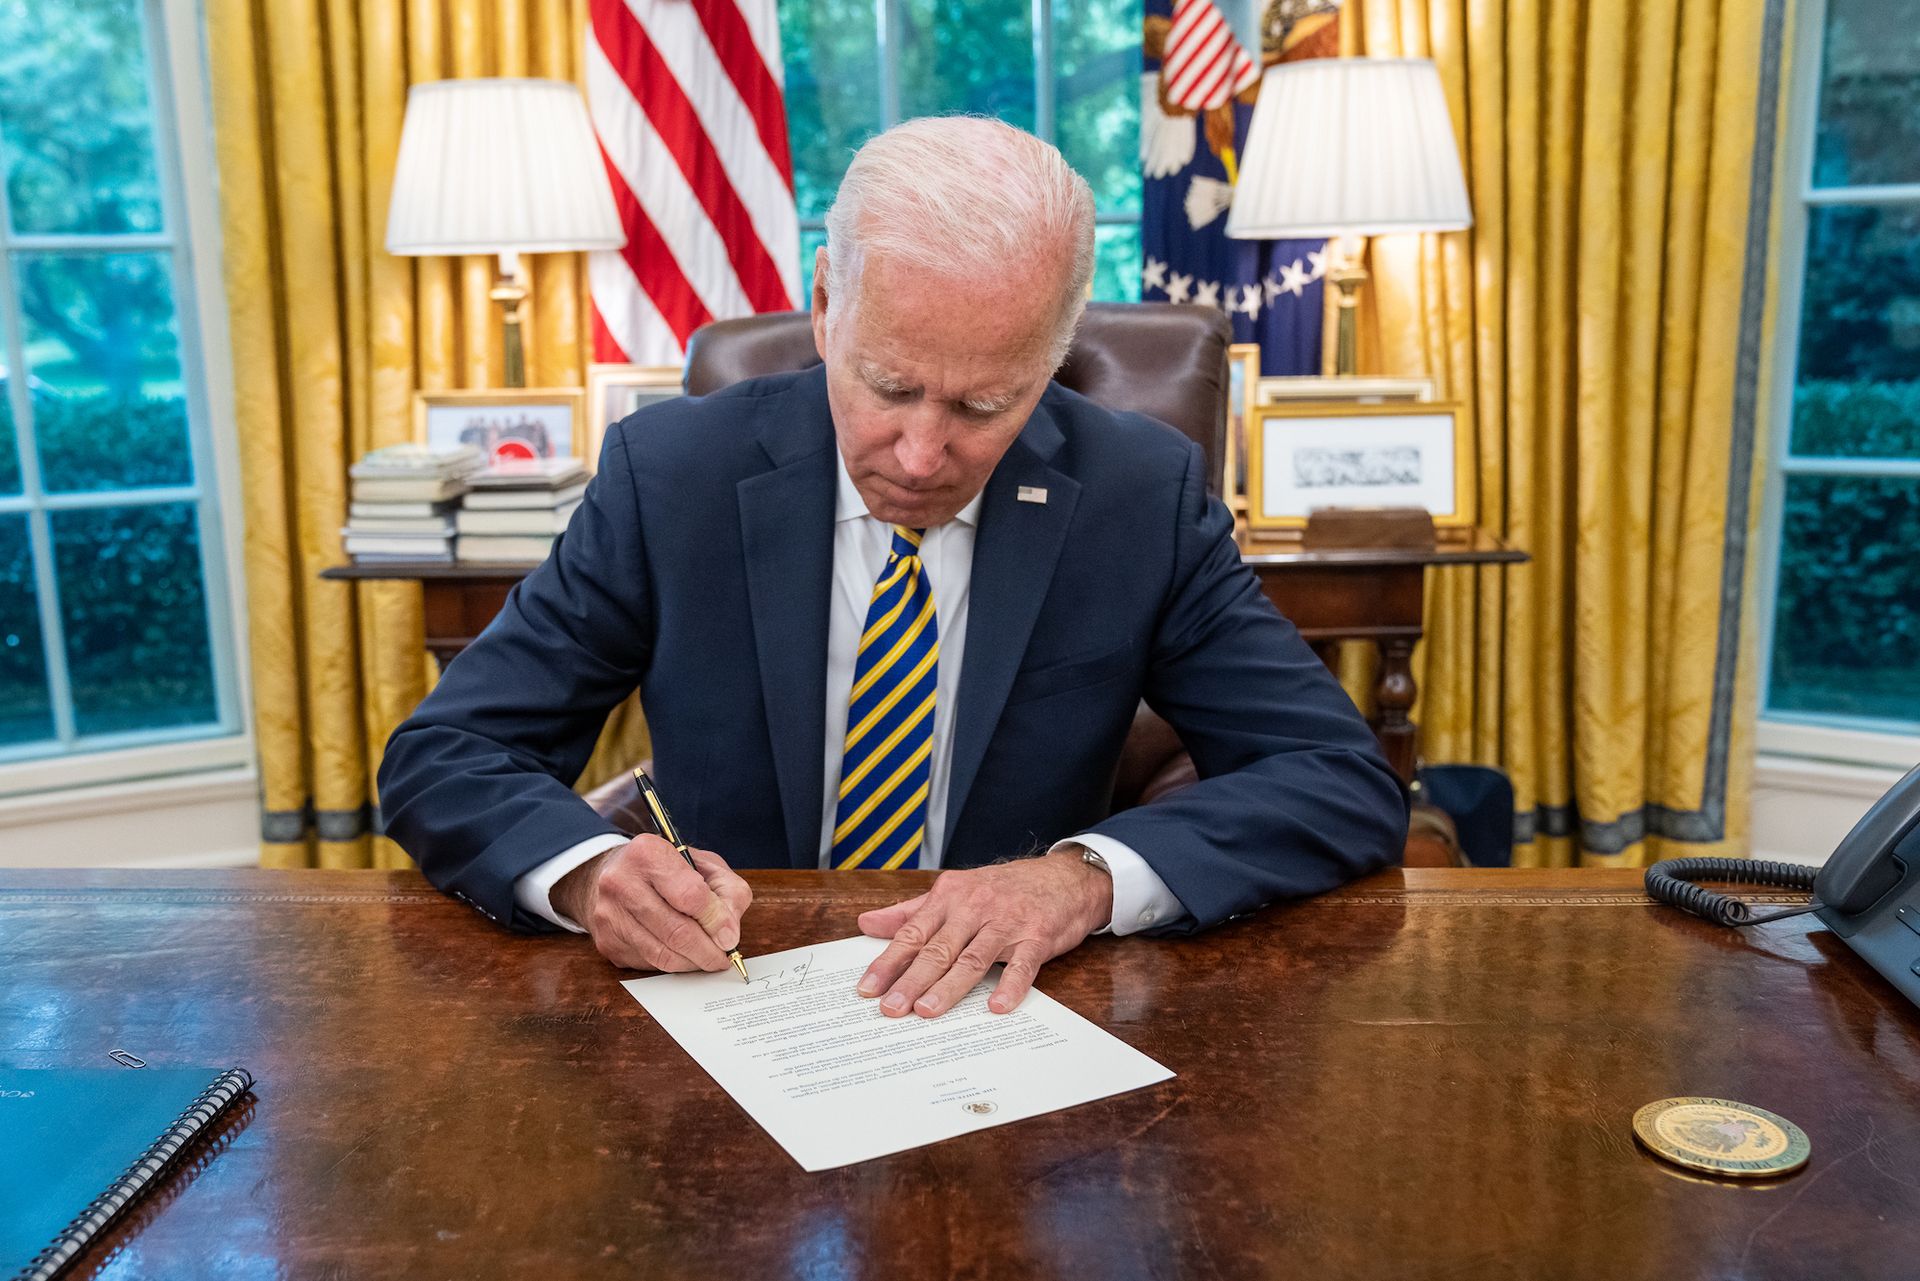 US President Joseph Biden signs a document in the Oval Office Official White House Photo by Carlos Fyfe, via Flickr